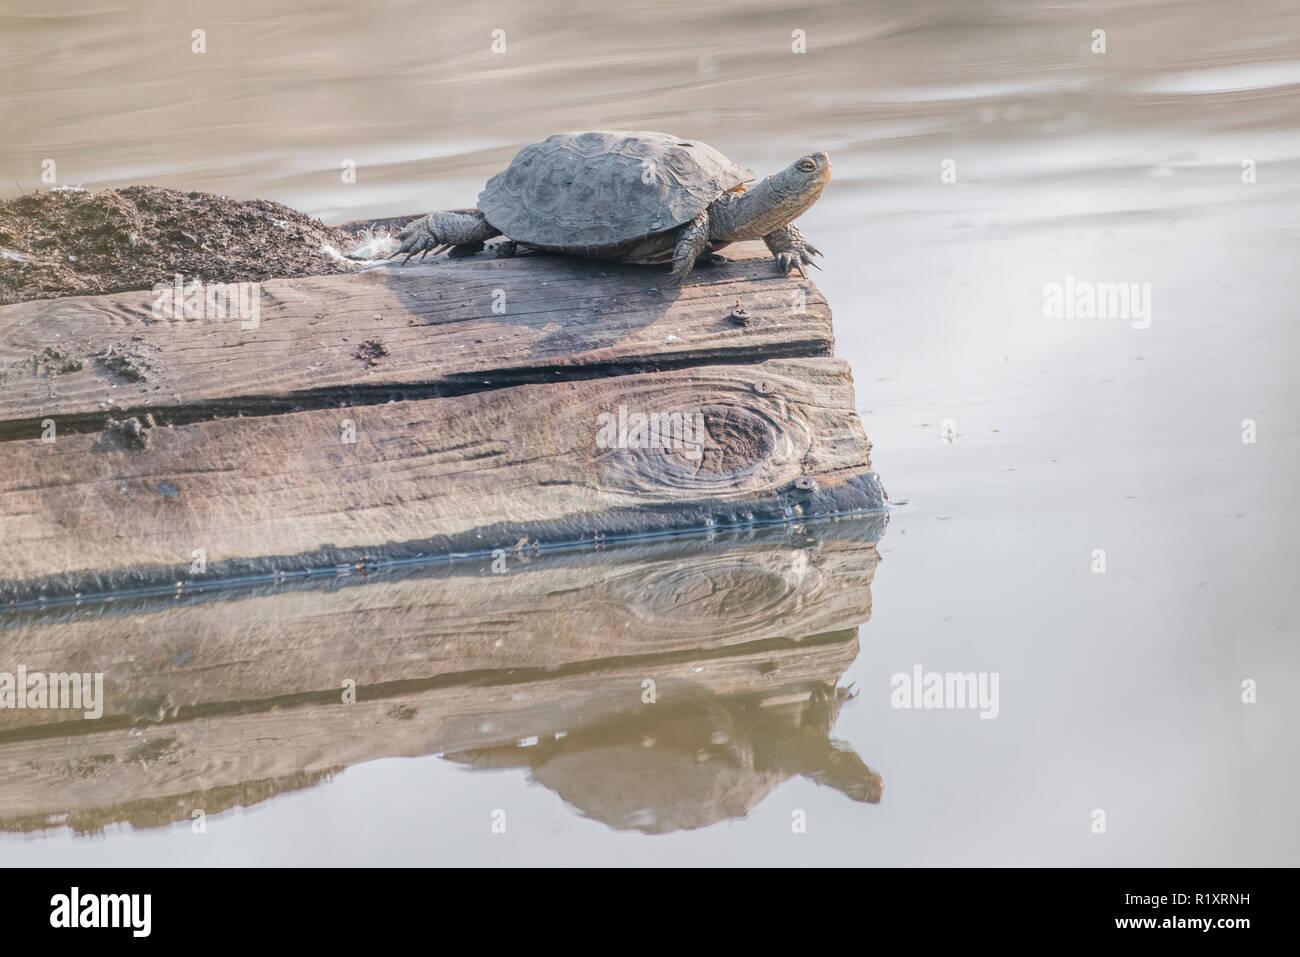 A wild western pond turtle (Emys marmorata) basking on an artificial float in one of California's regional parks. Stock Photo